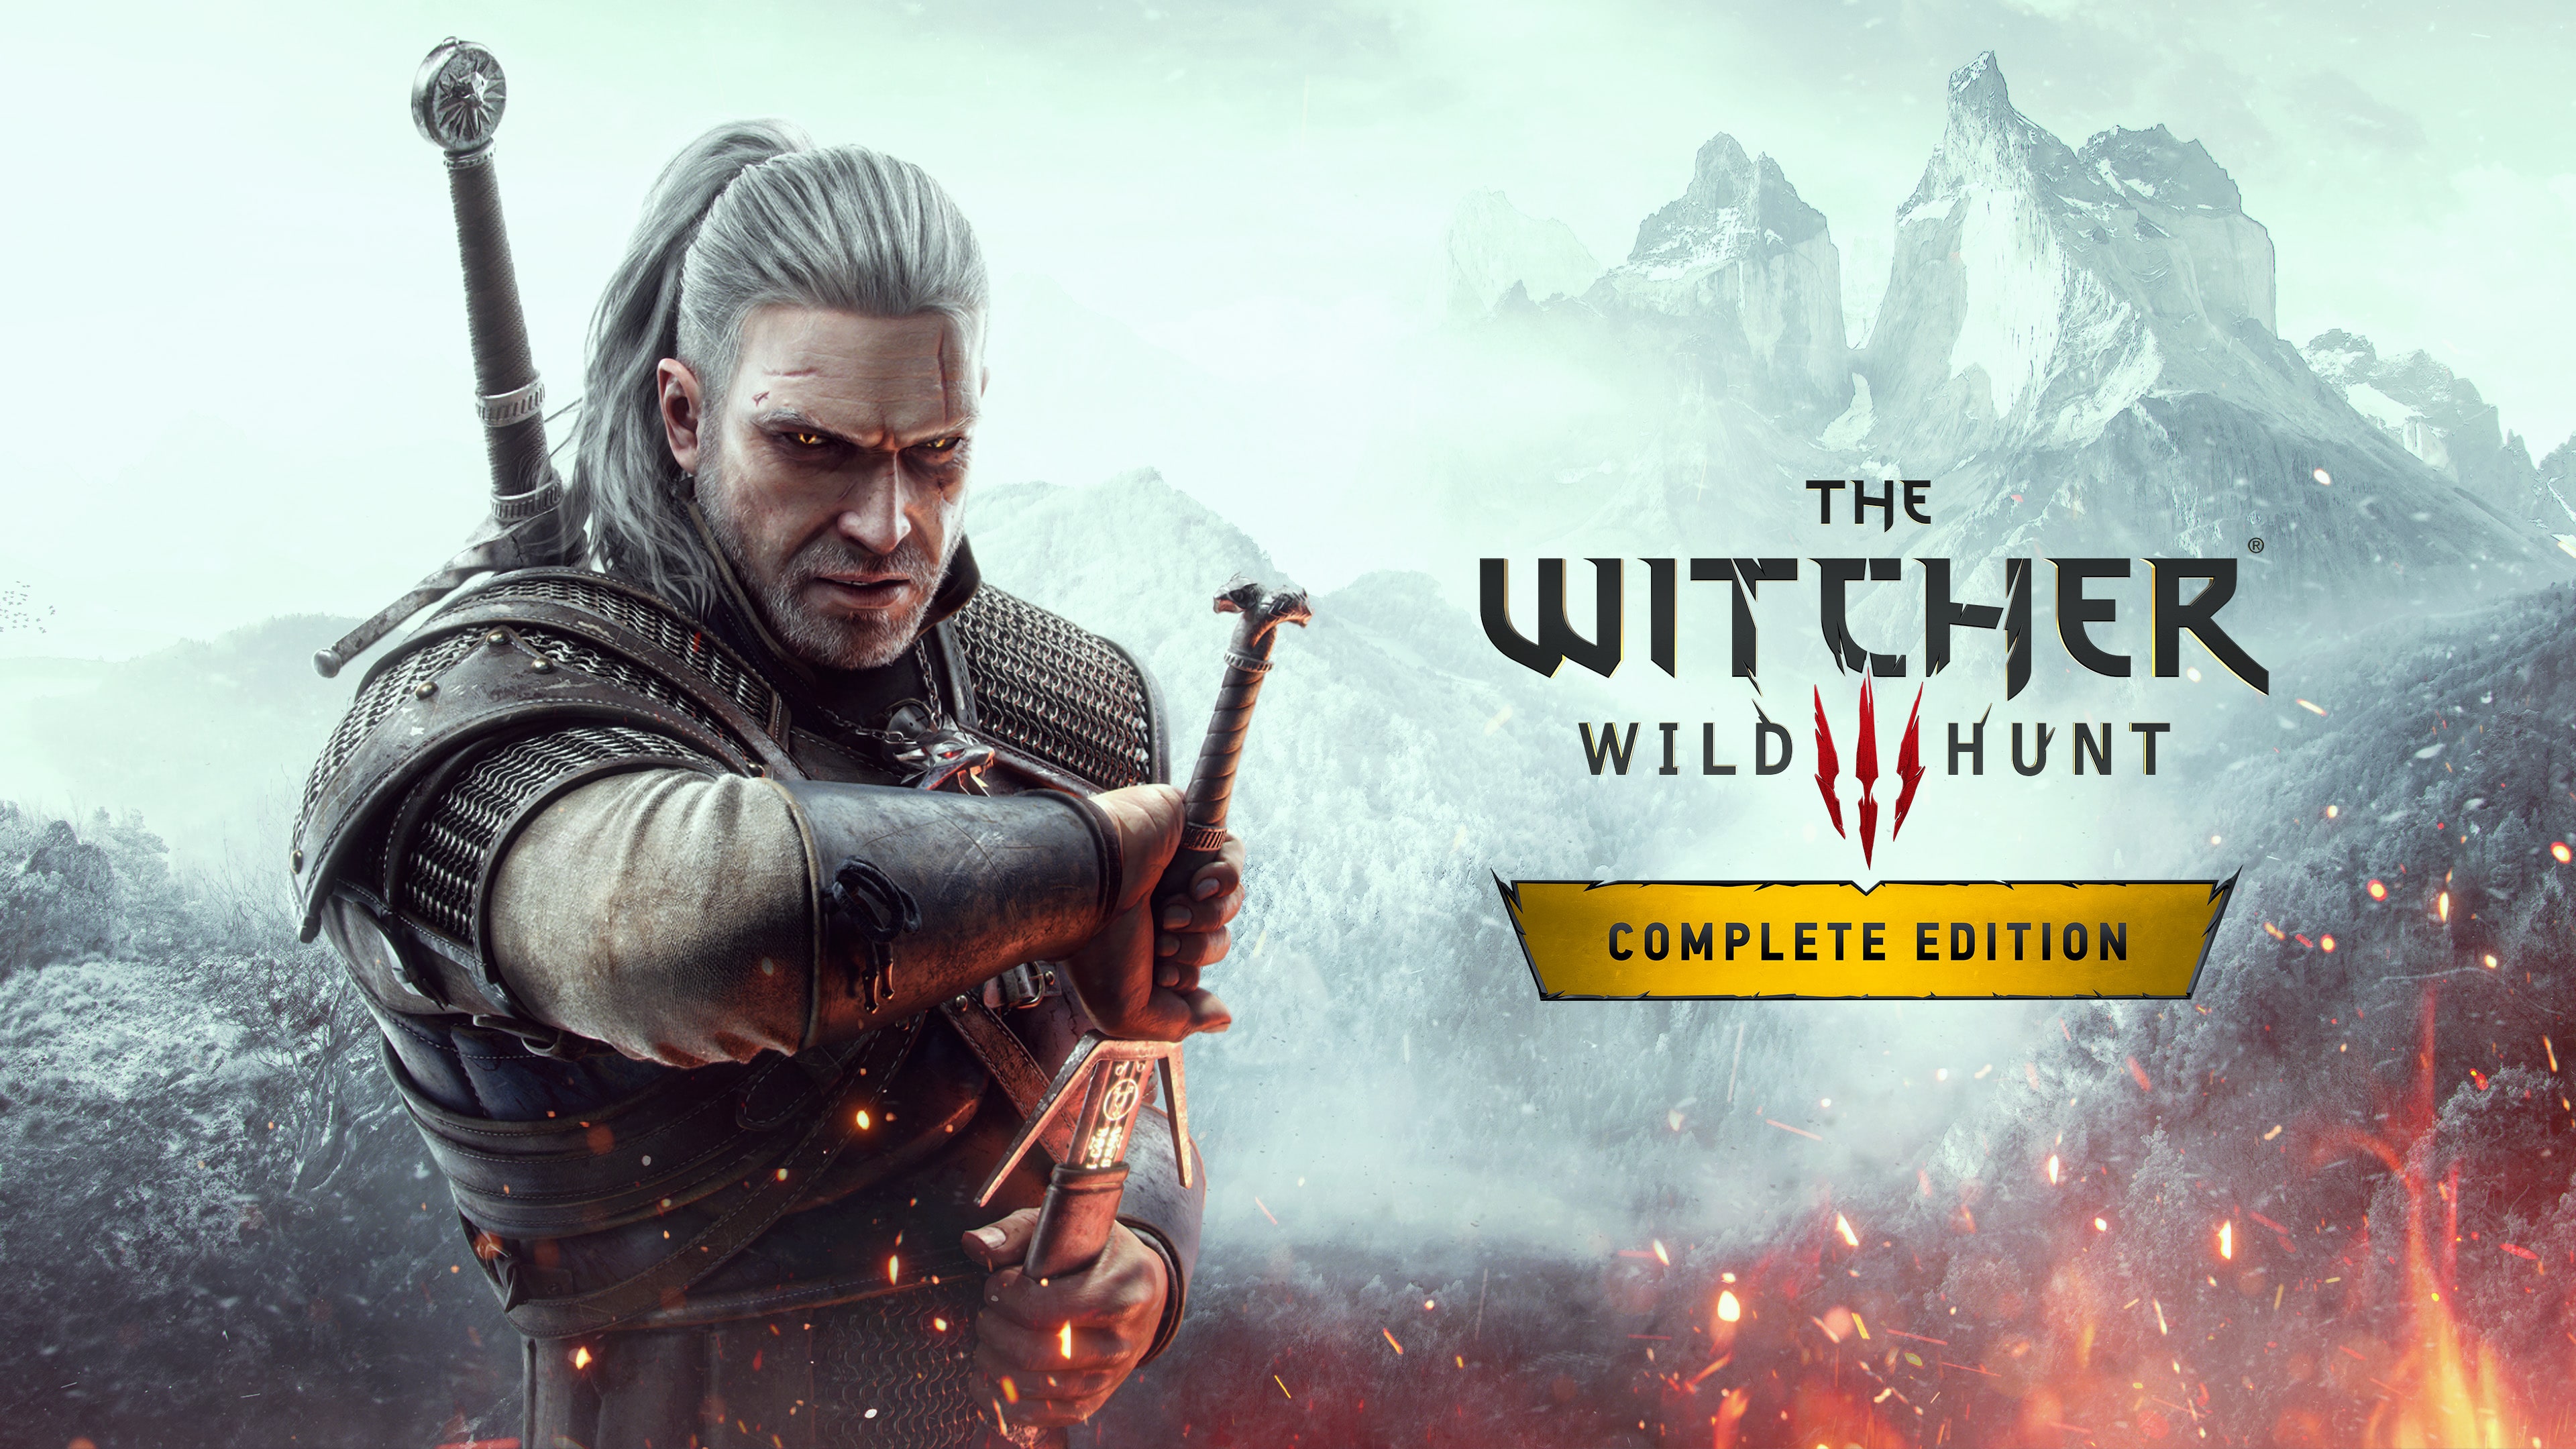 The Witcher 3: Wild Hunt – Complete Edition (Simplified Chinese, English, Korean, Traditional Chinese)